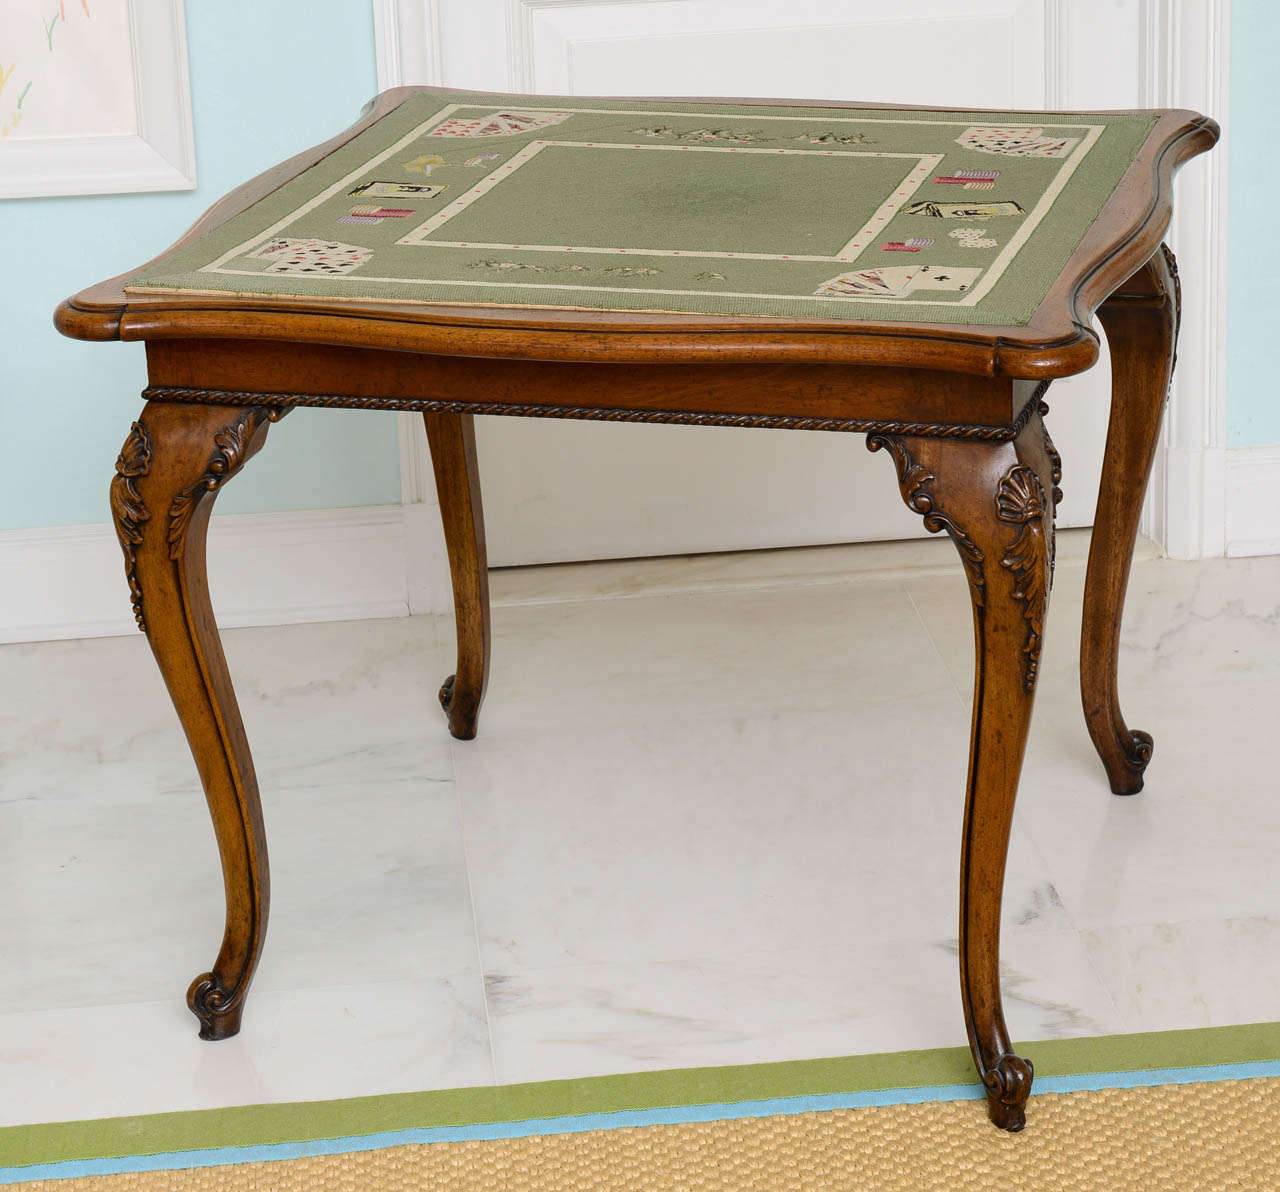 The top lined with lined with trompe l'oeil needlepoint depicting a card game. Very refined piece featuring double serpentine shape, ribbon carved frieze, shell carved cabriole legs terminating in scroll-form feet.